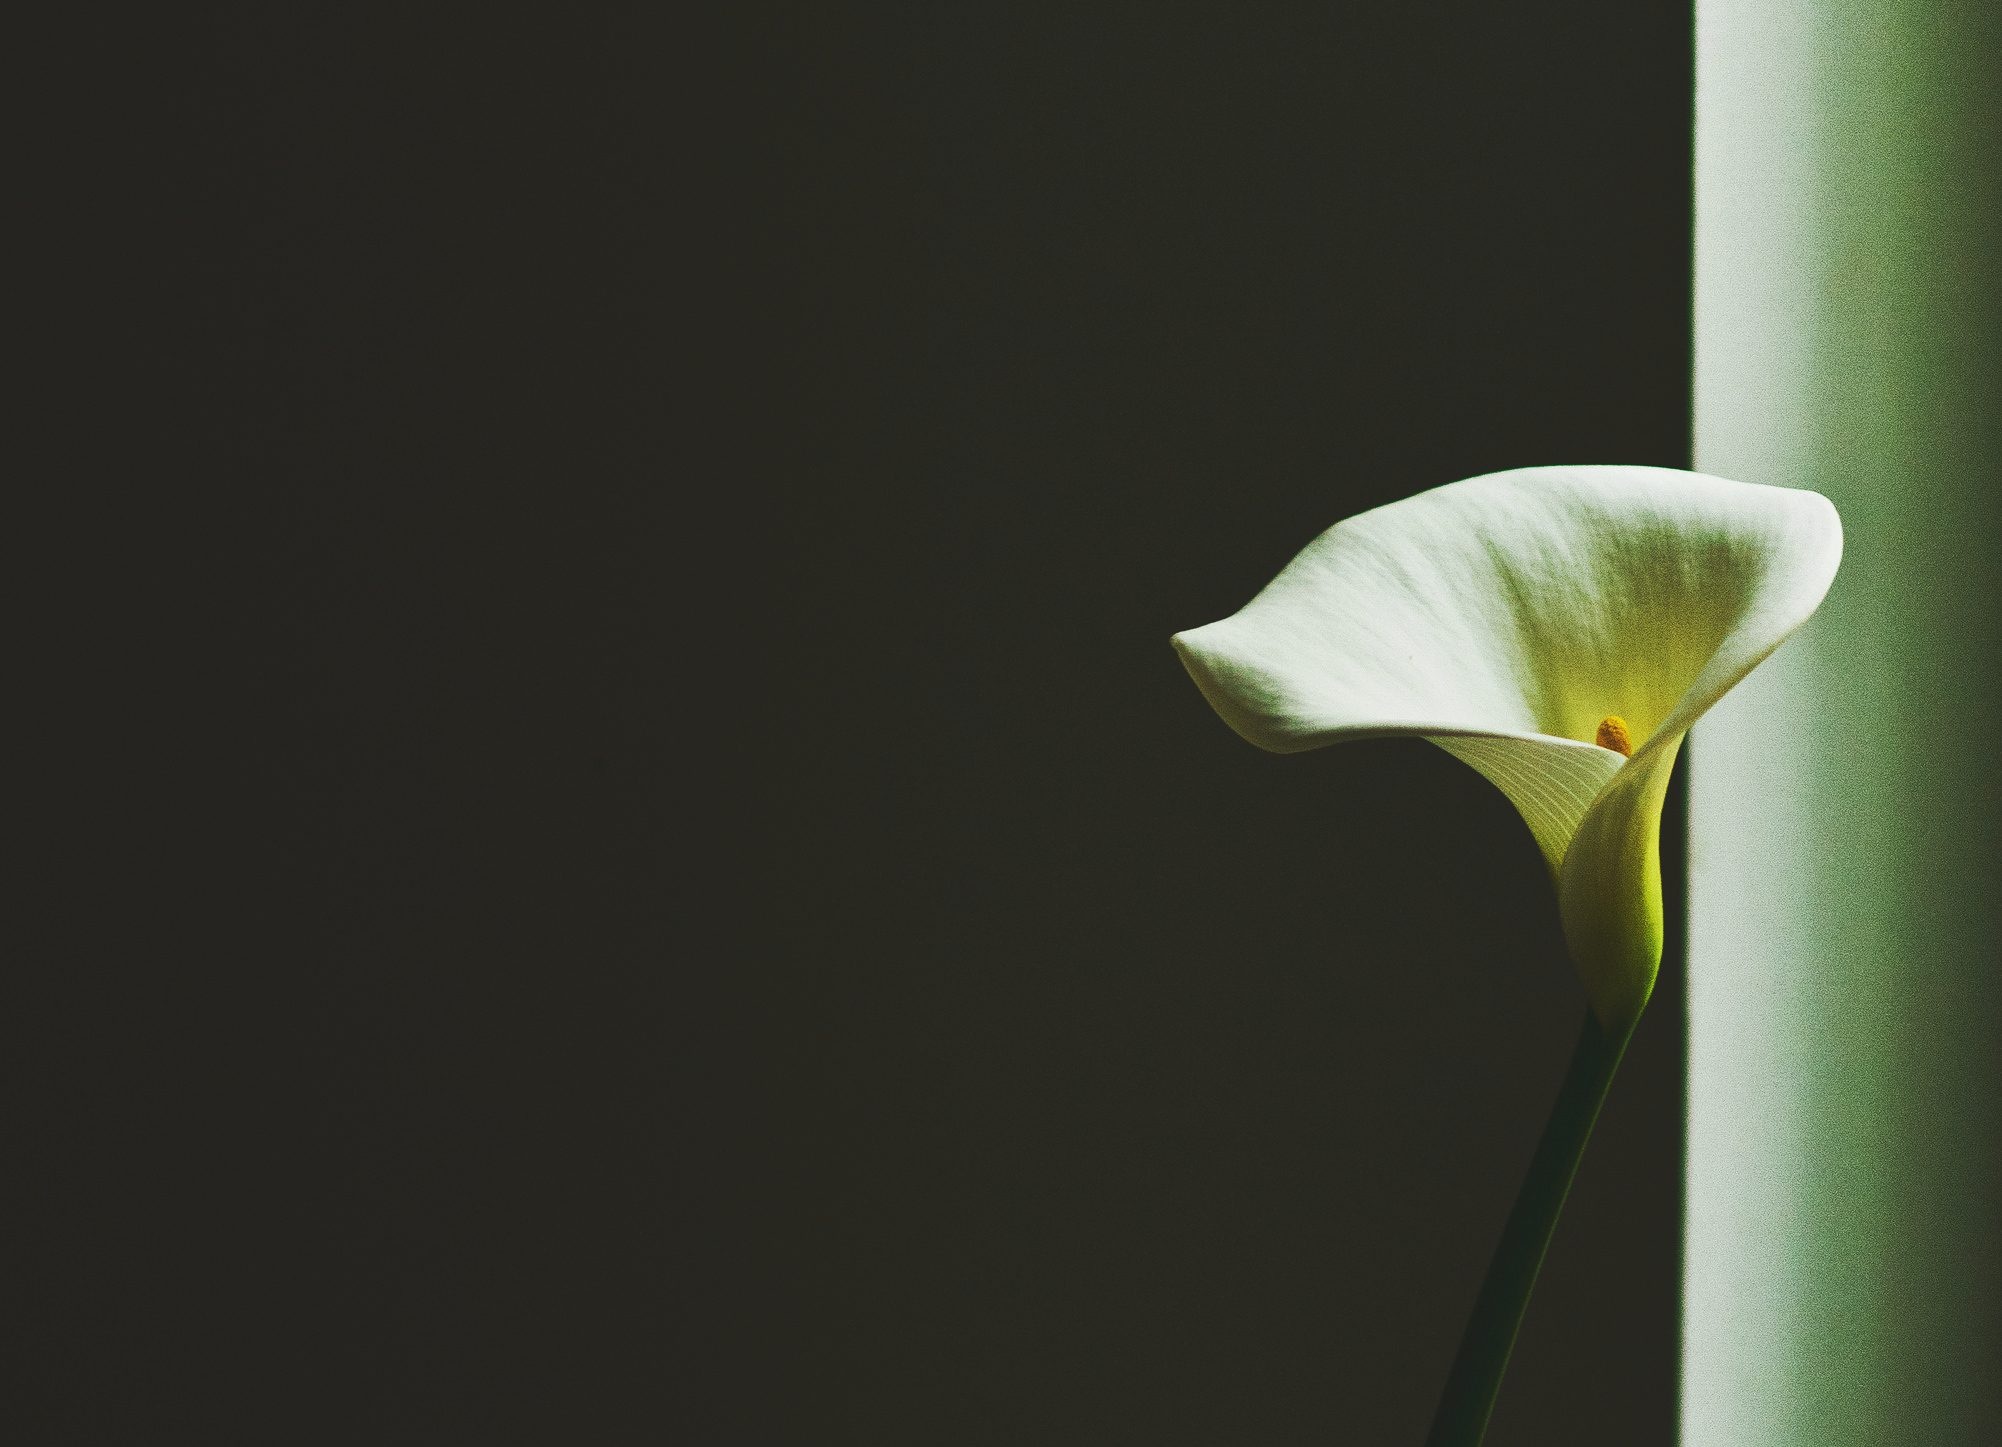 Calla Lily: Petioles are long, spongy, and sheathed at the bases. 2010x1450 HD Wallpaper.